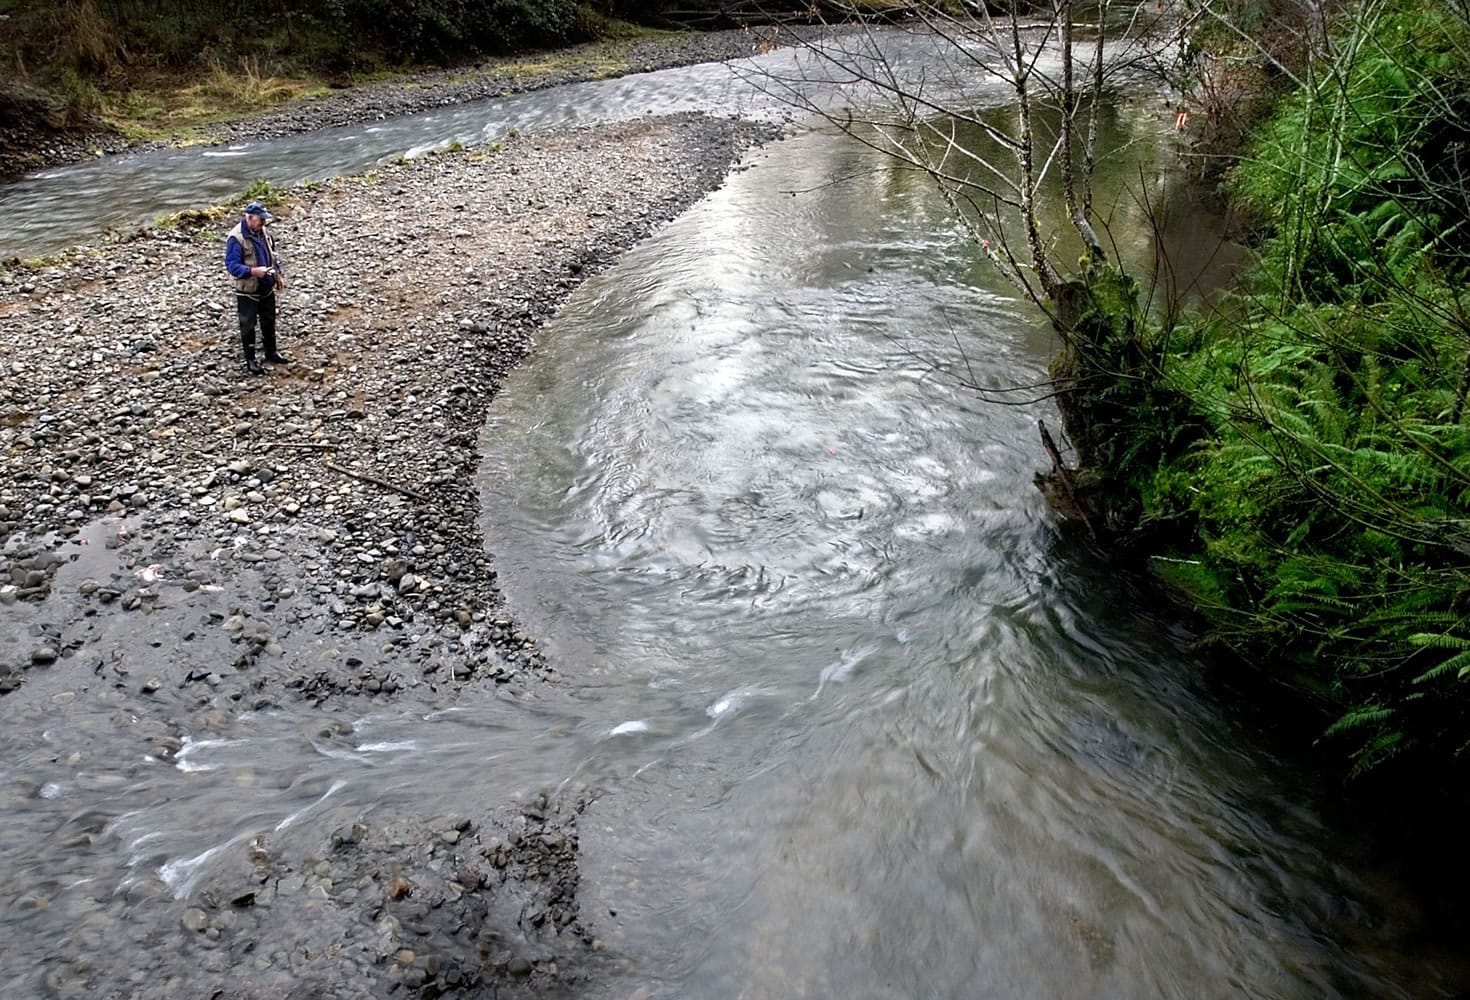 A lone fisherman tries his luck in the shallow waters of Grays River at the Grays River Hatchery.